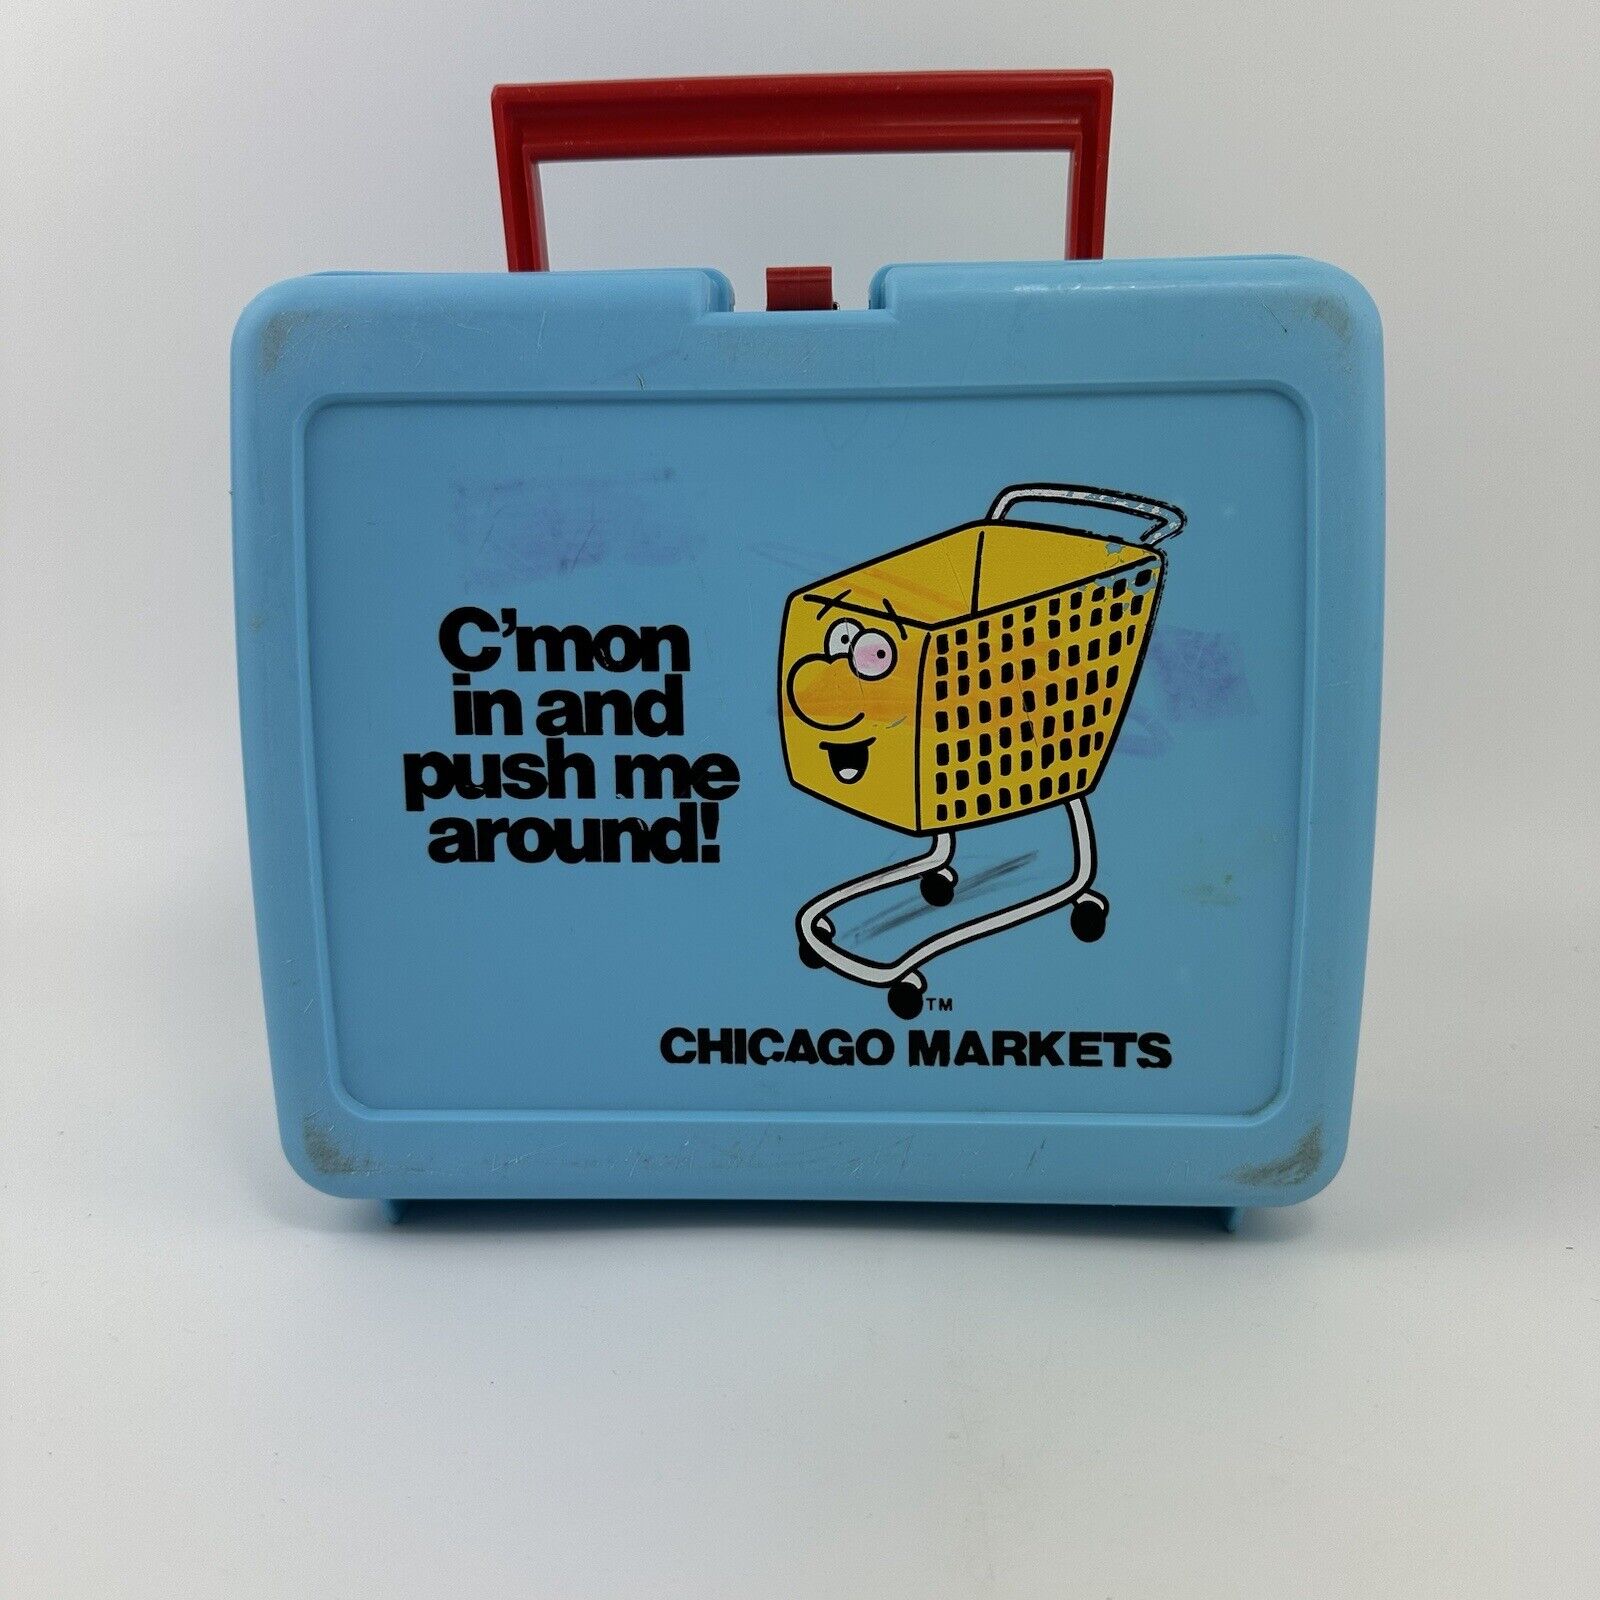 Vintage Chicago Markets Thermos Lunchbox Advertising Scarce Very Rare HTF